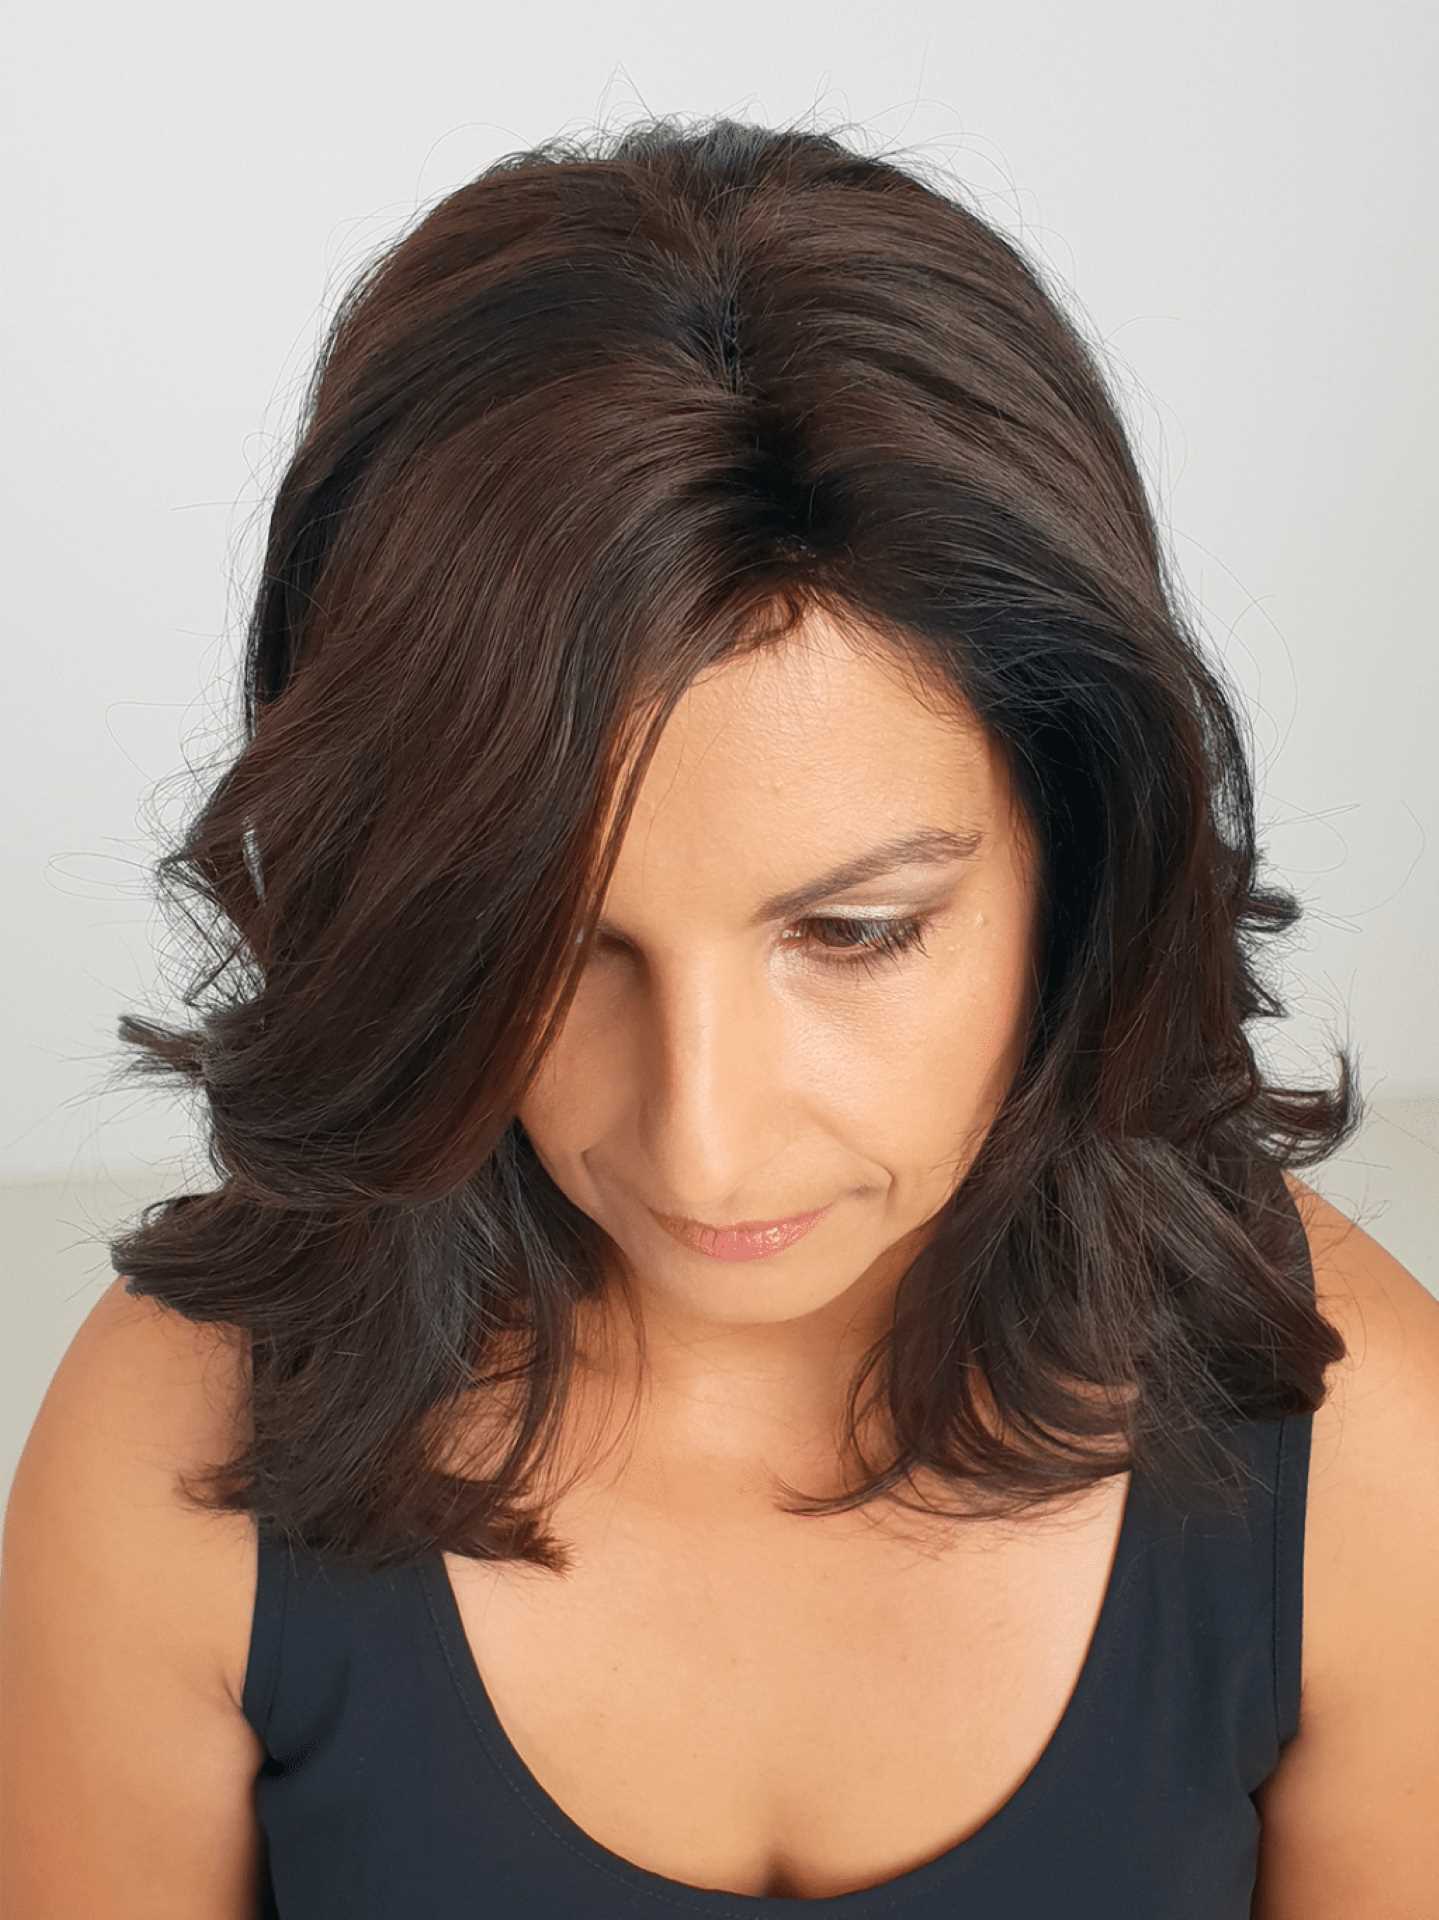 After hair thickening on brown hair of woman